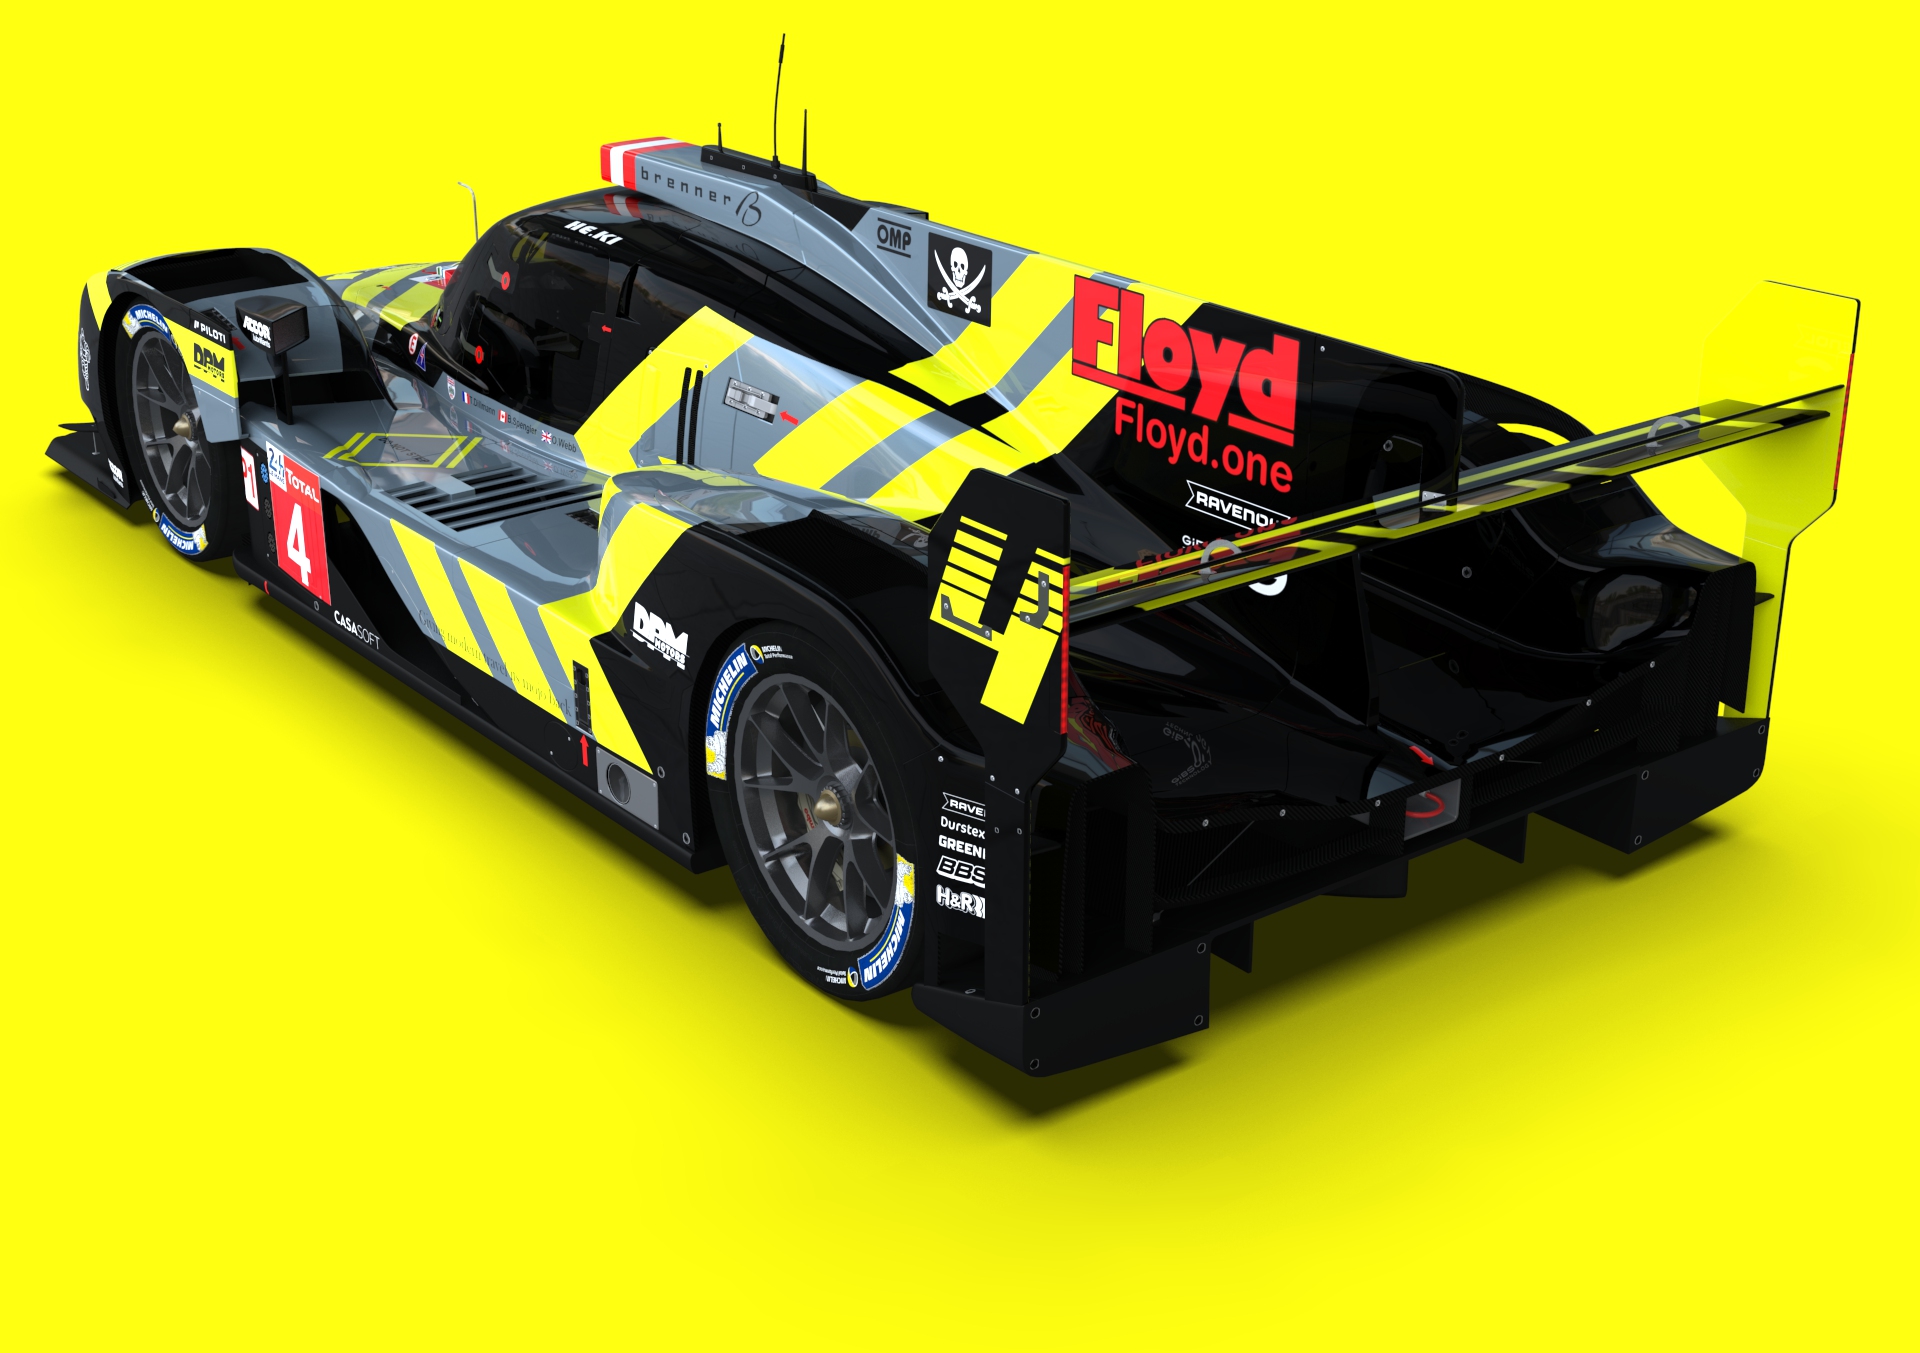 The Best LMP1 MOD ByKolles ENSO CLM P1/01 LMP1 for rFactor 2 3D is ready